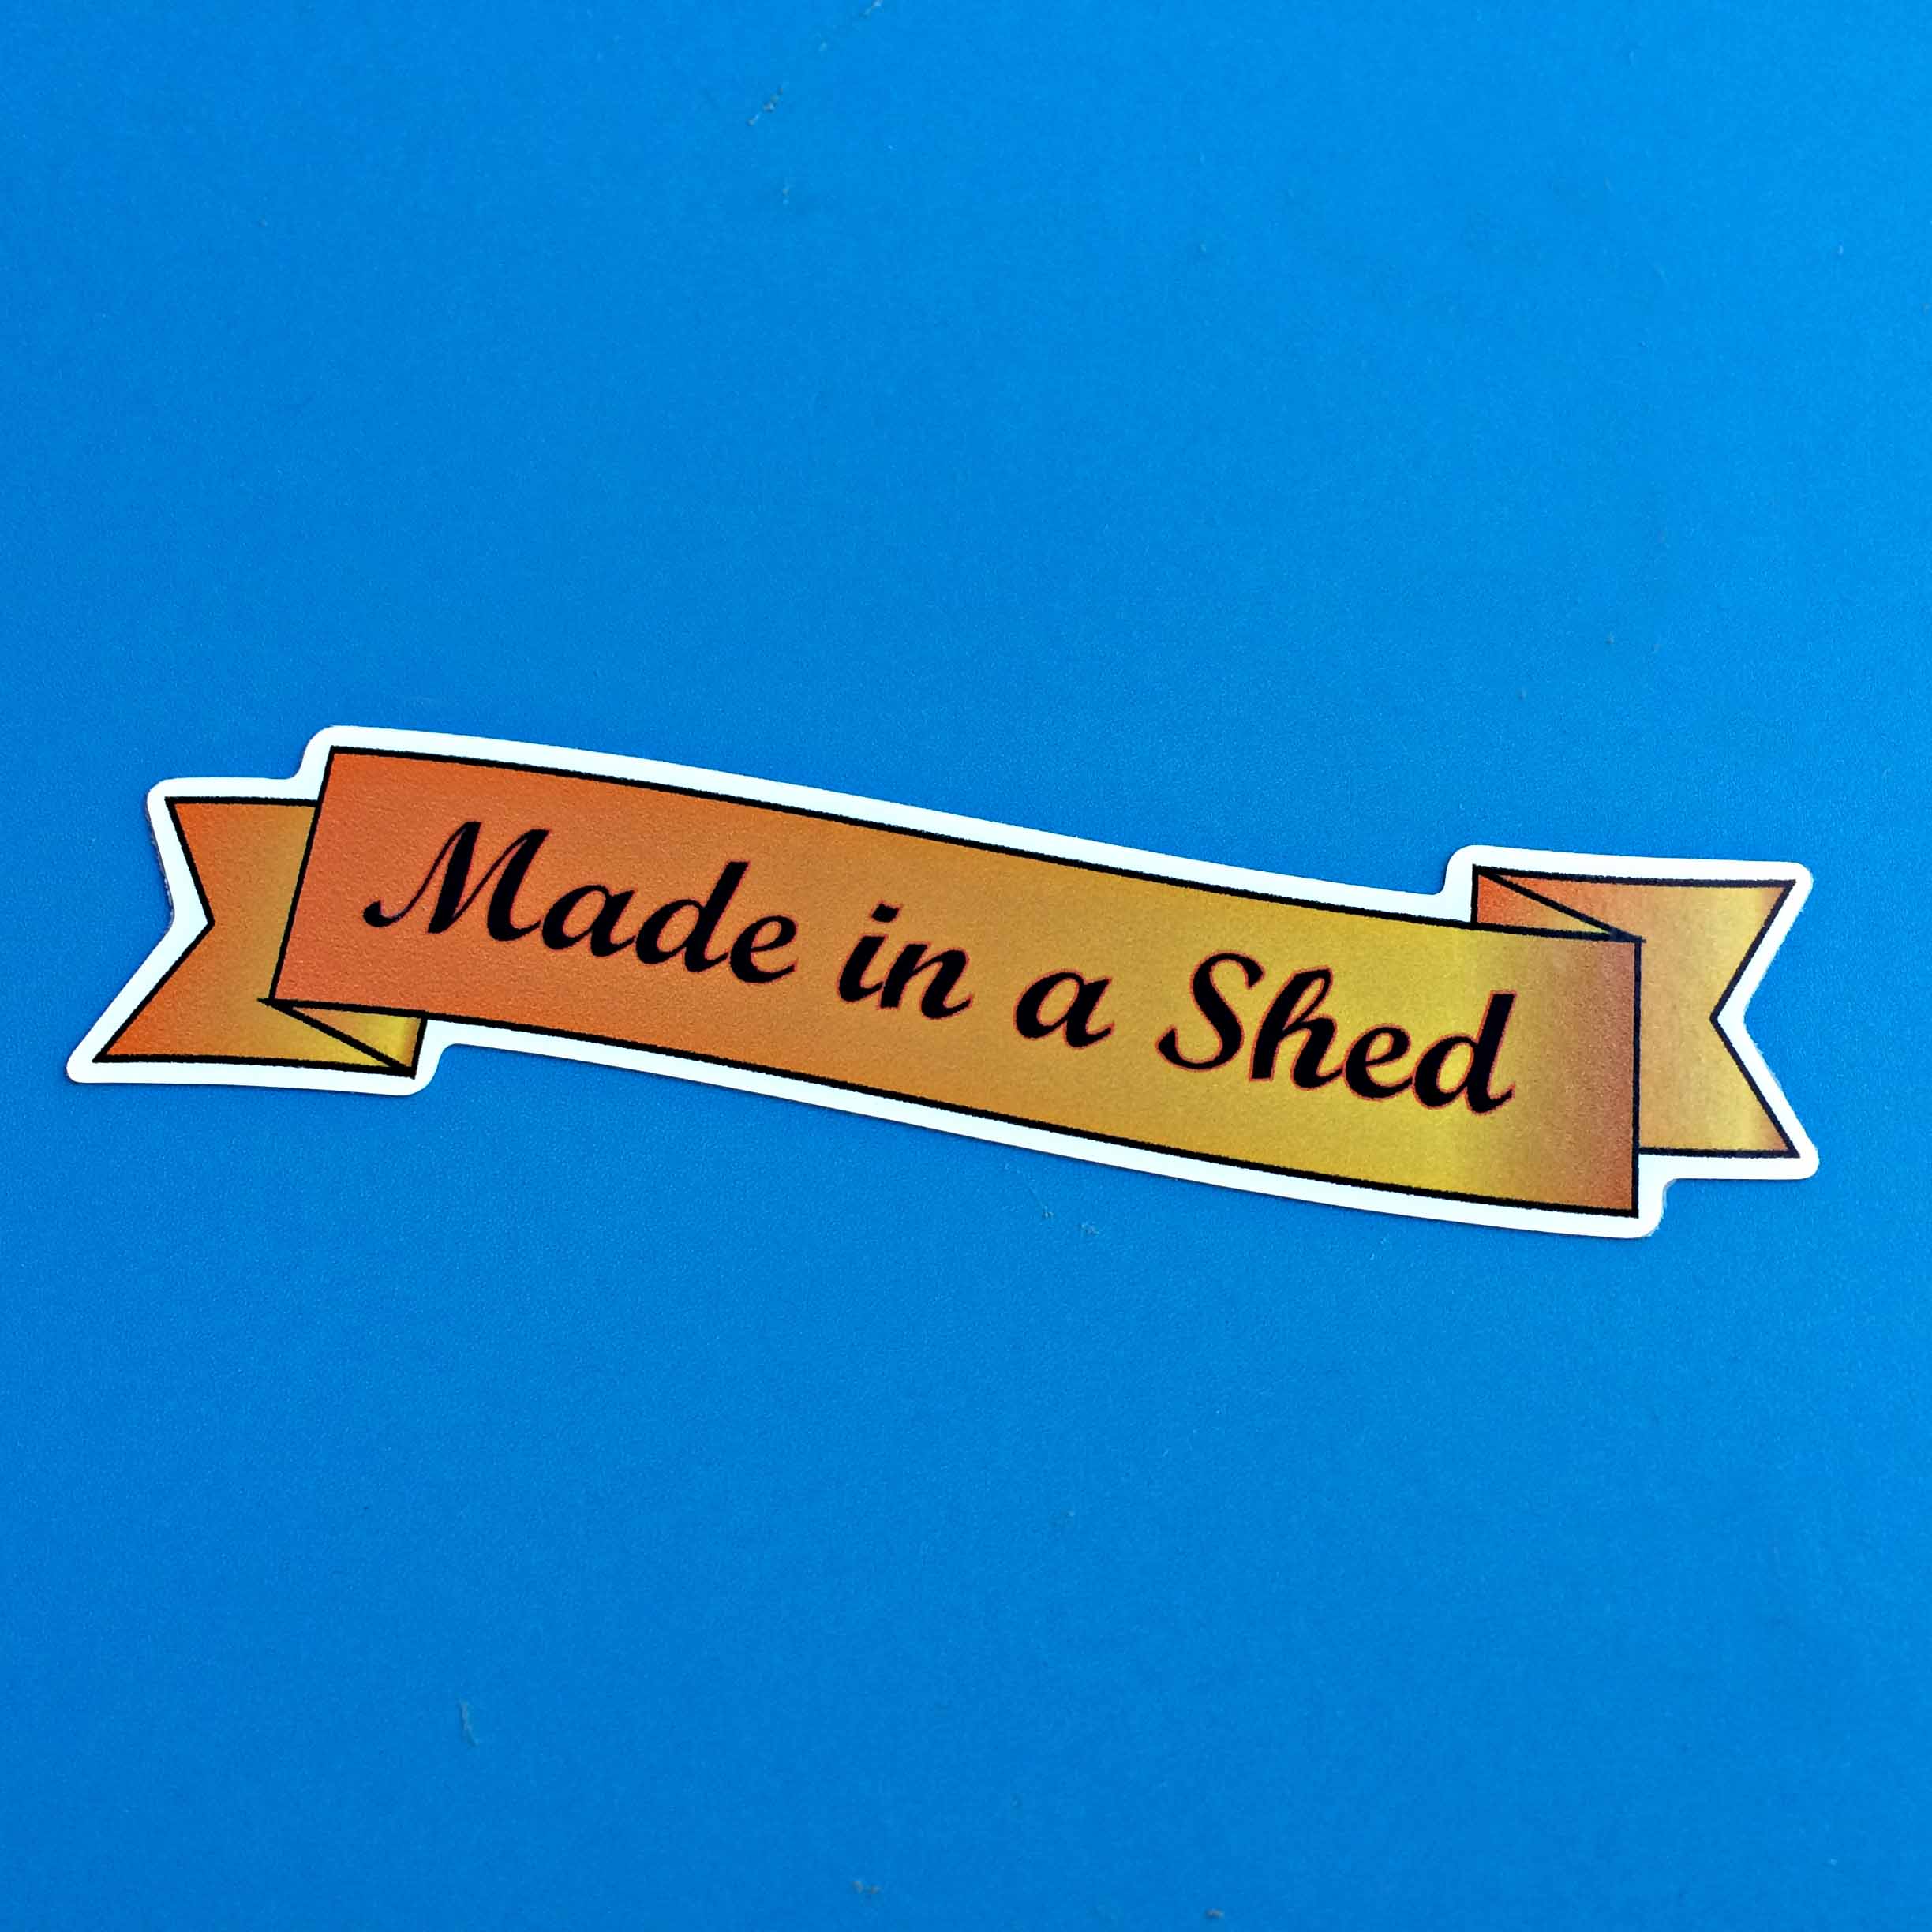 MADE IN A SHED STICKER. Made in a Shed handwritten font in black on a gold length of ribbon.